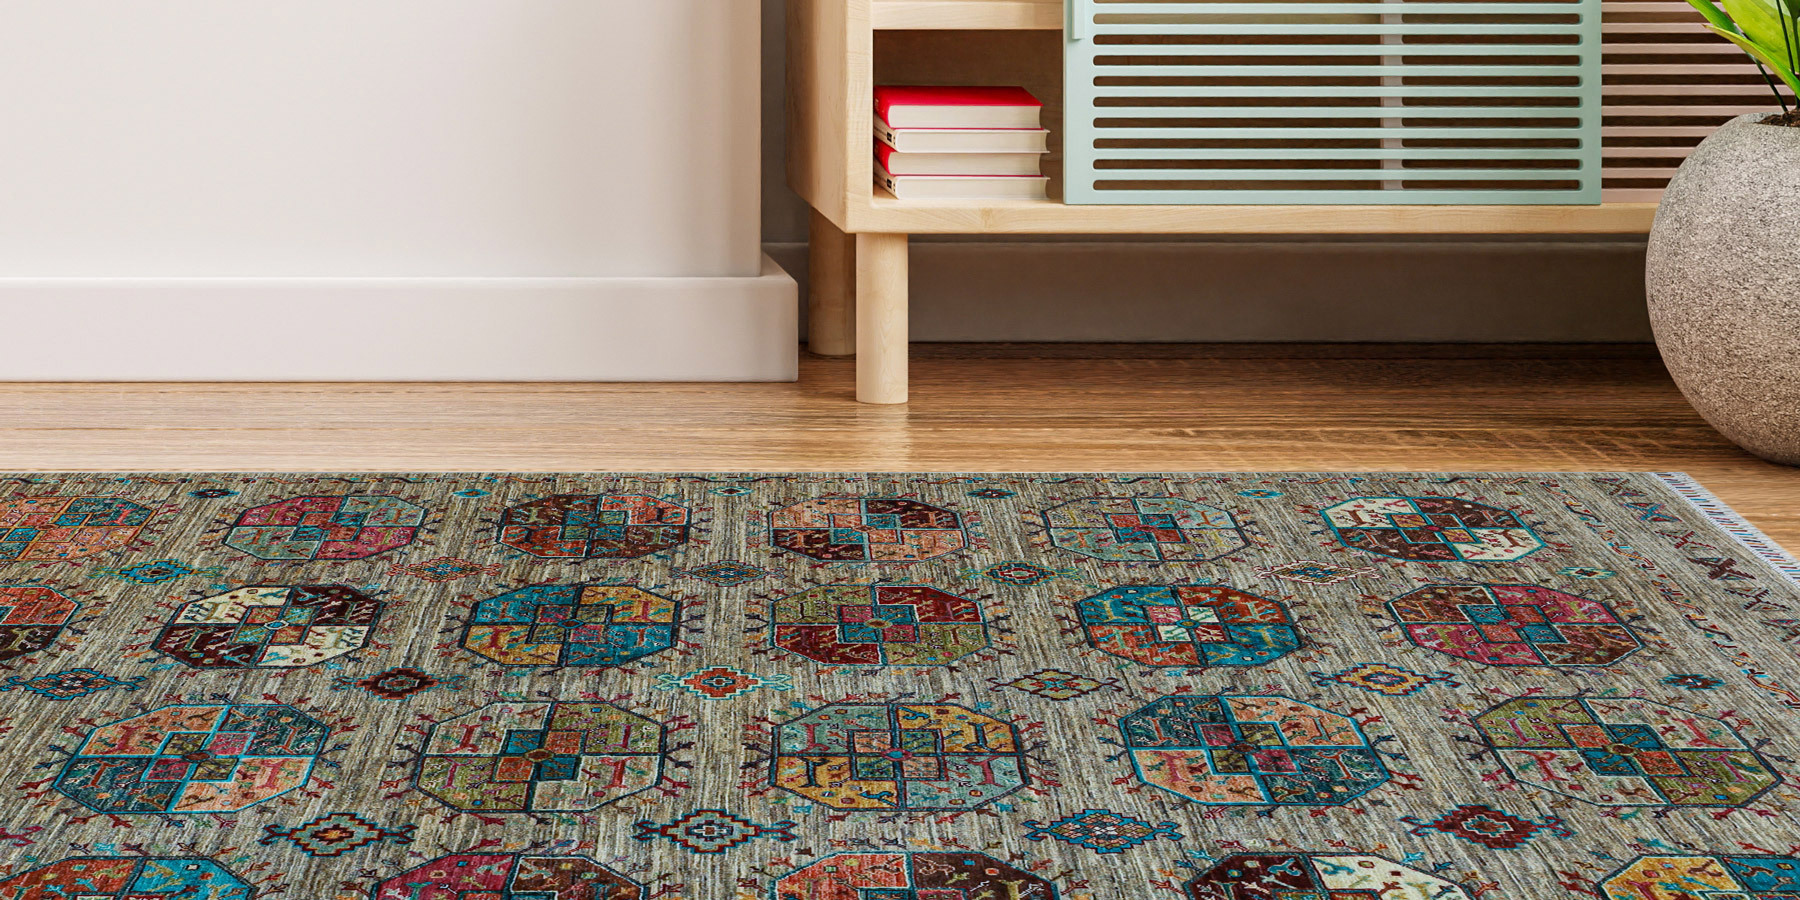 Deck Out Your Space With Hand-Woven Afghan Oriental Rugs